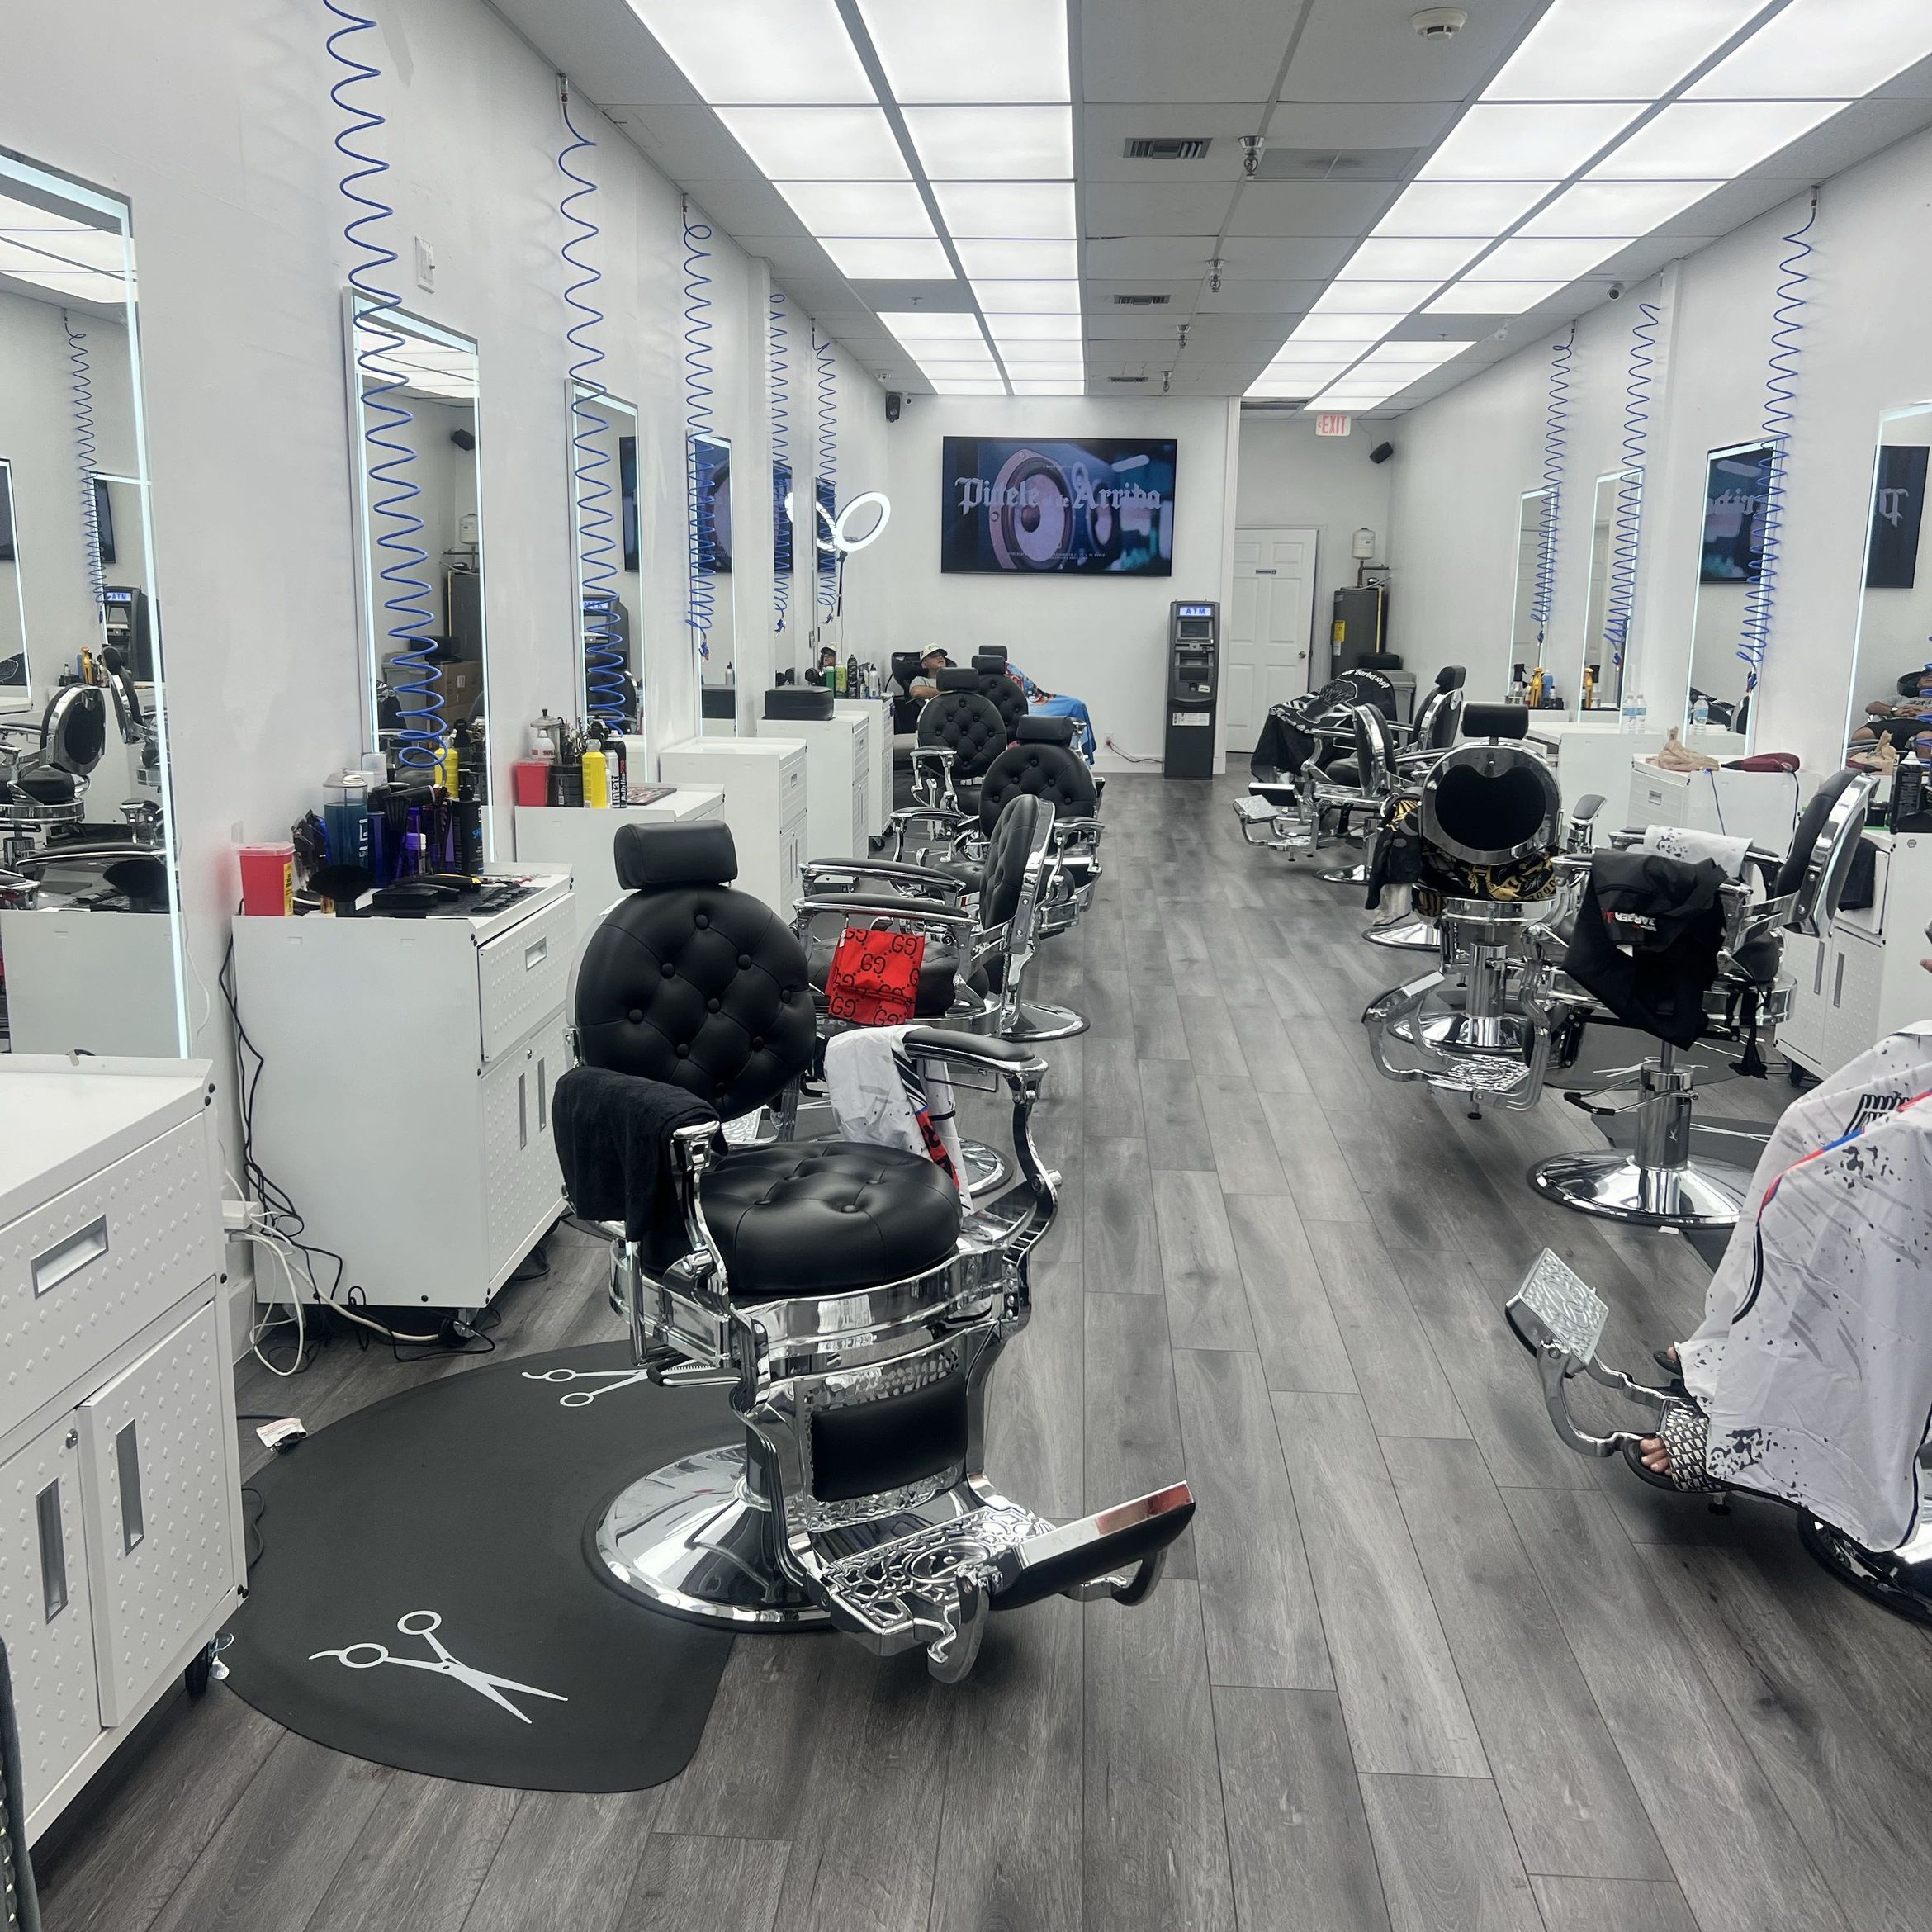 Marco Cuba Barber, 1724 s congress ave, Palm Springs, 33461